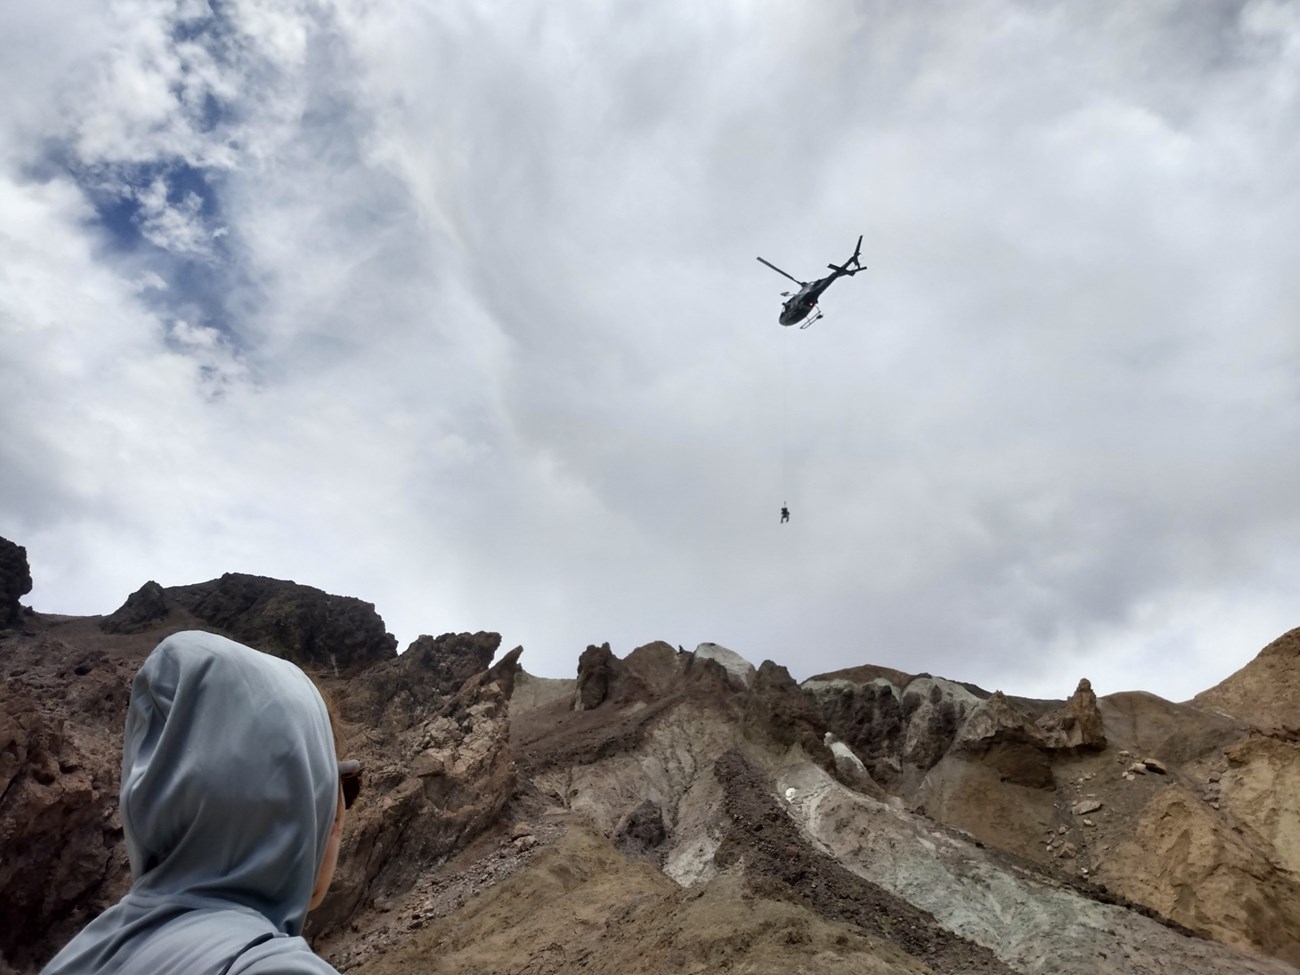 A person wearing a gray hood has their back to the camera looking up at a steep dirt and rock ridge. A person dangles from a helicopter above the ridge.